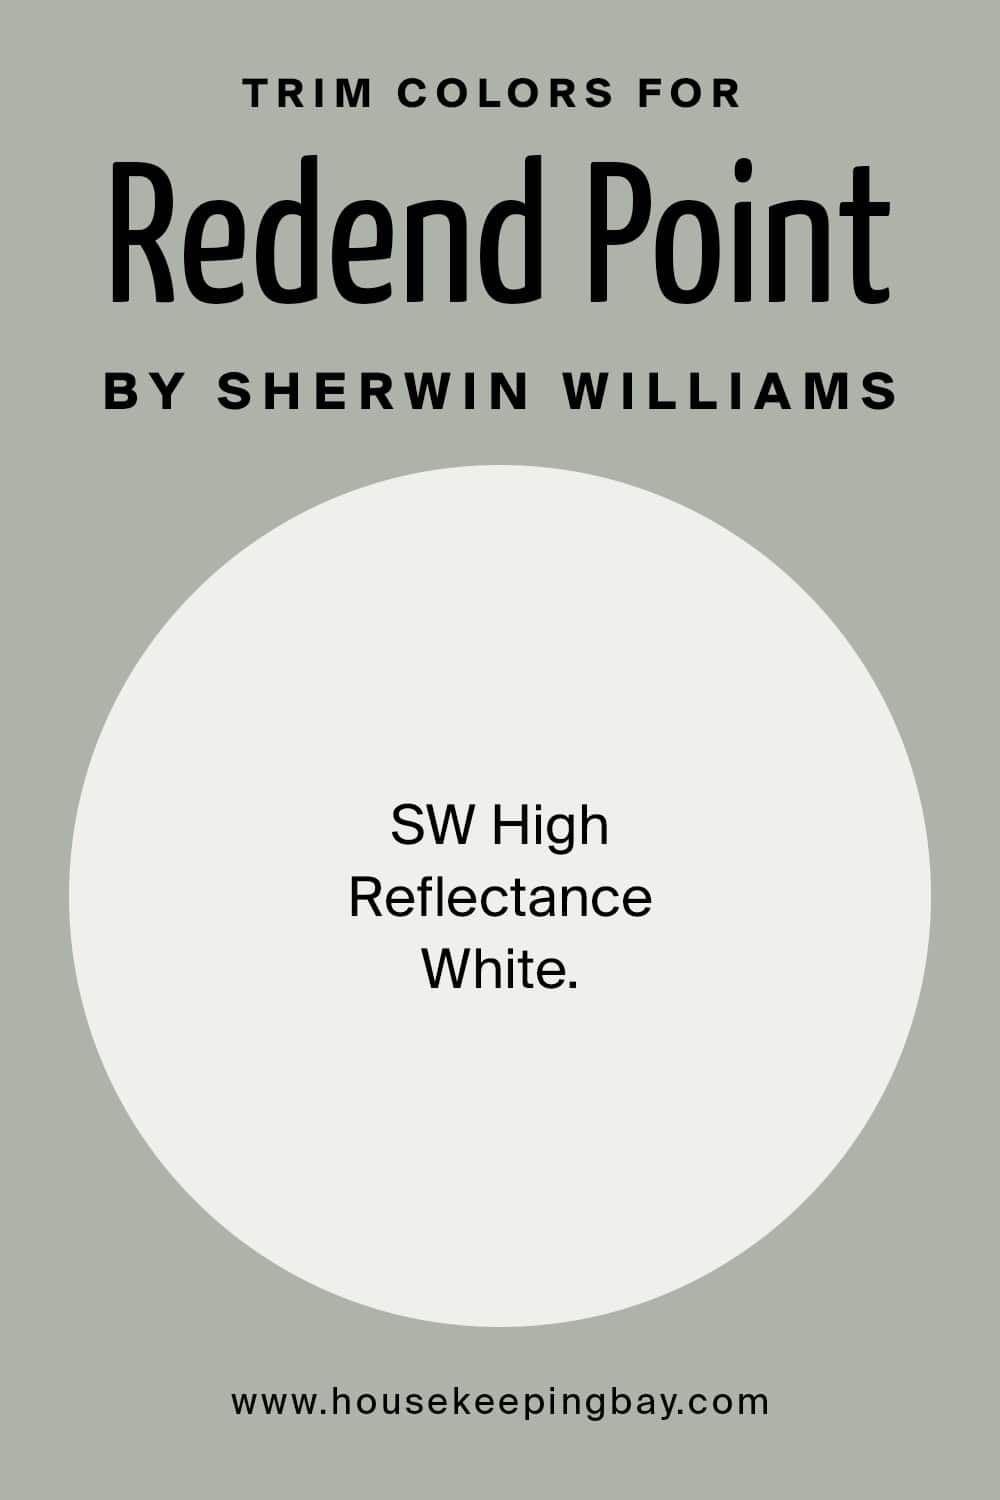 Trim Colors for Oyster Bay by Sherwin Williams